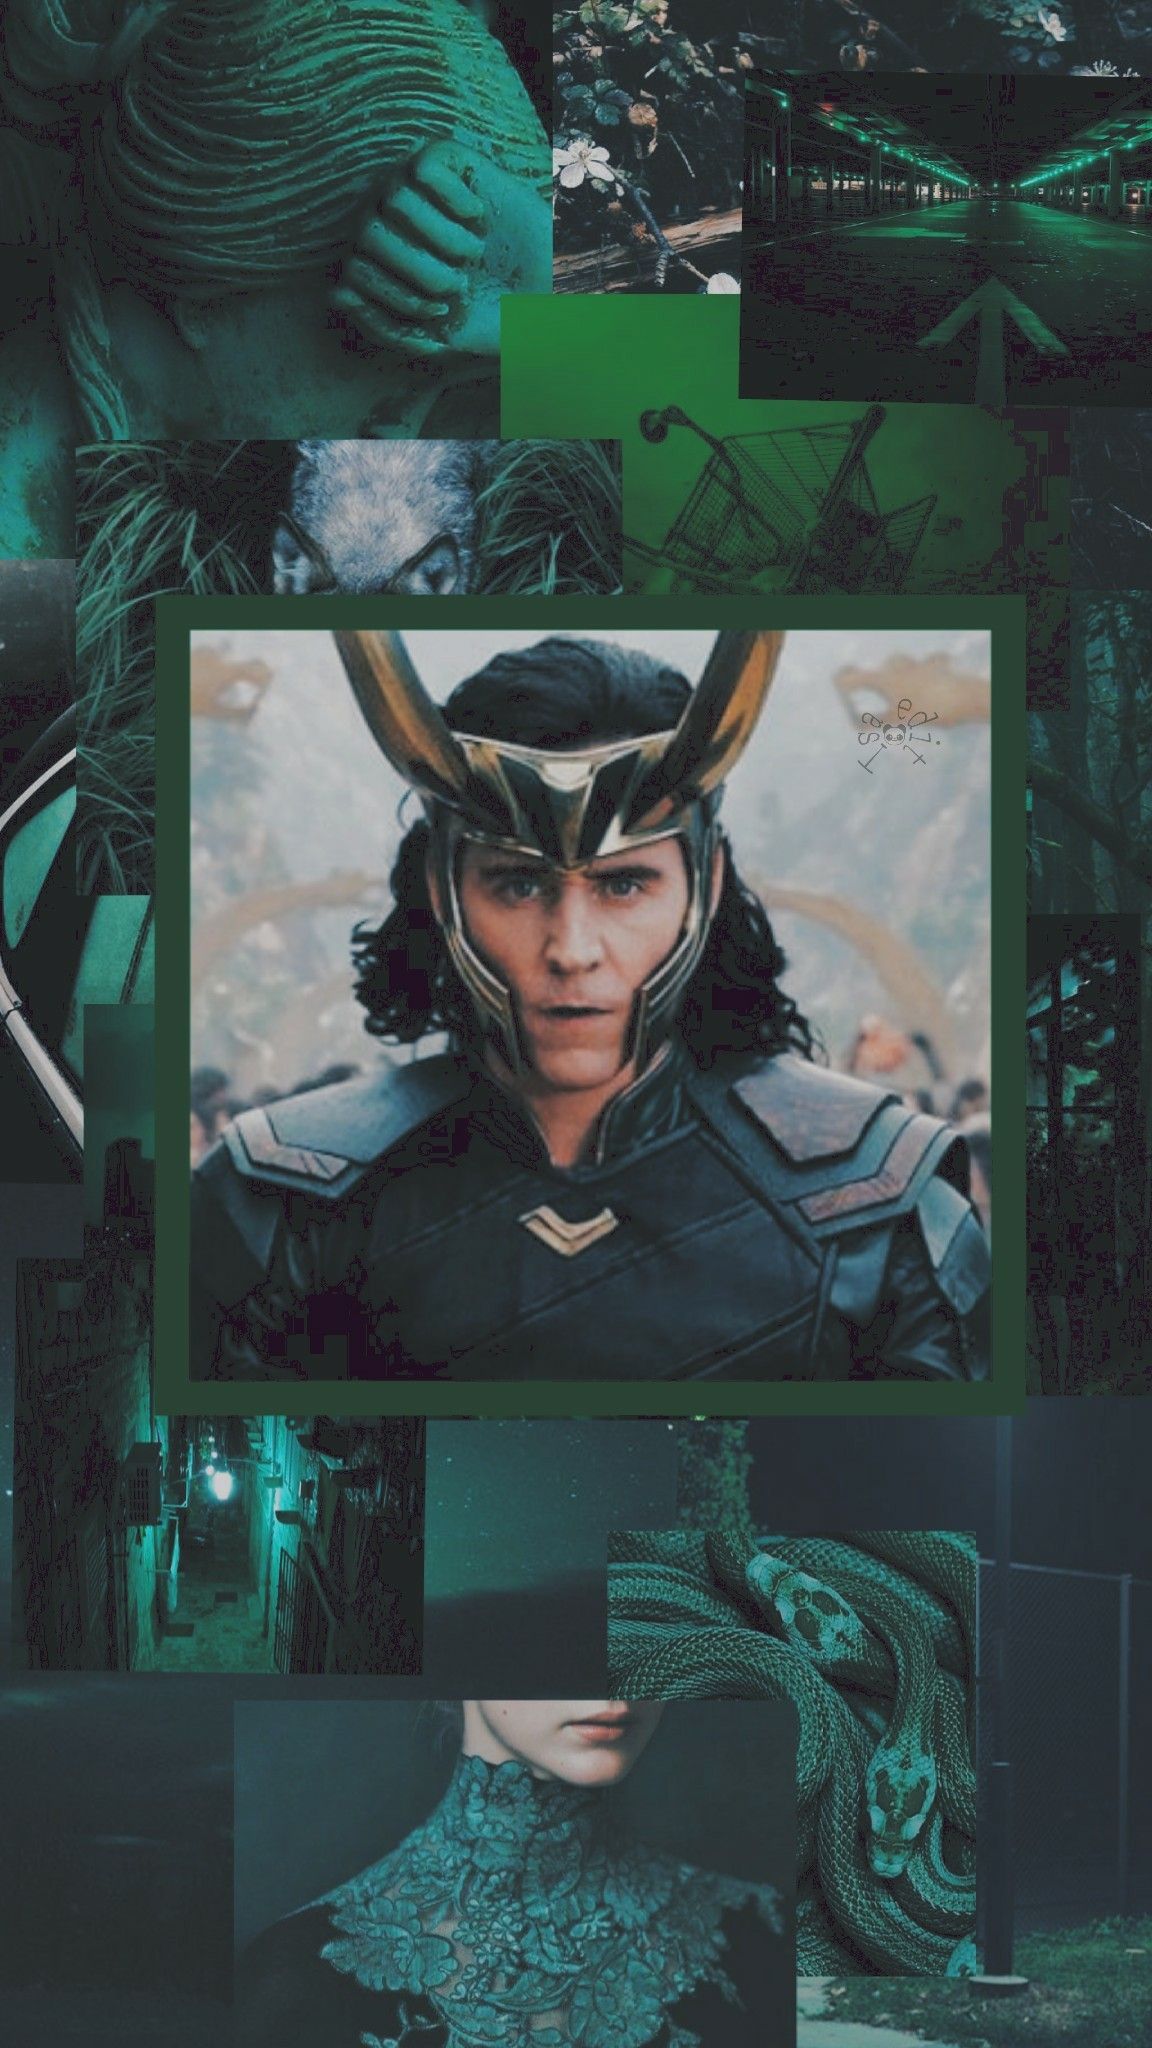 A collage of pictures of Tom Hiddleston as Loki, with a green aesthetic - Loki